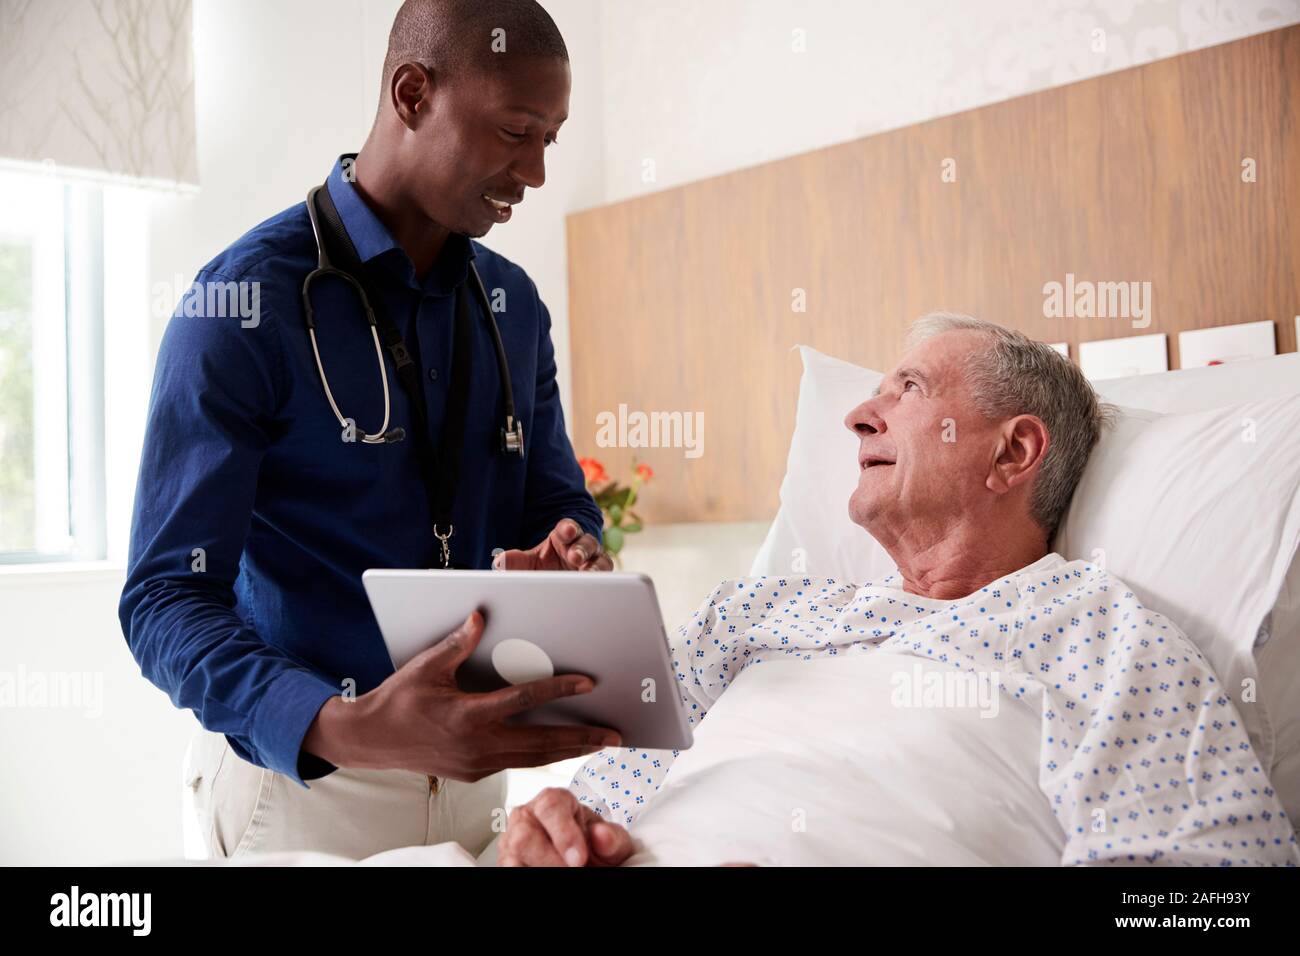 Doctor With Digital Tablet Visiting And Talking With Senior Male Patient In Hospital Bed Stock Photo